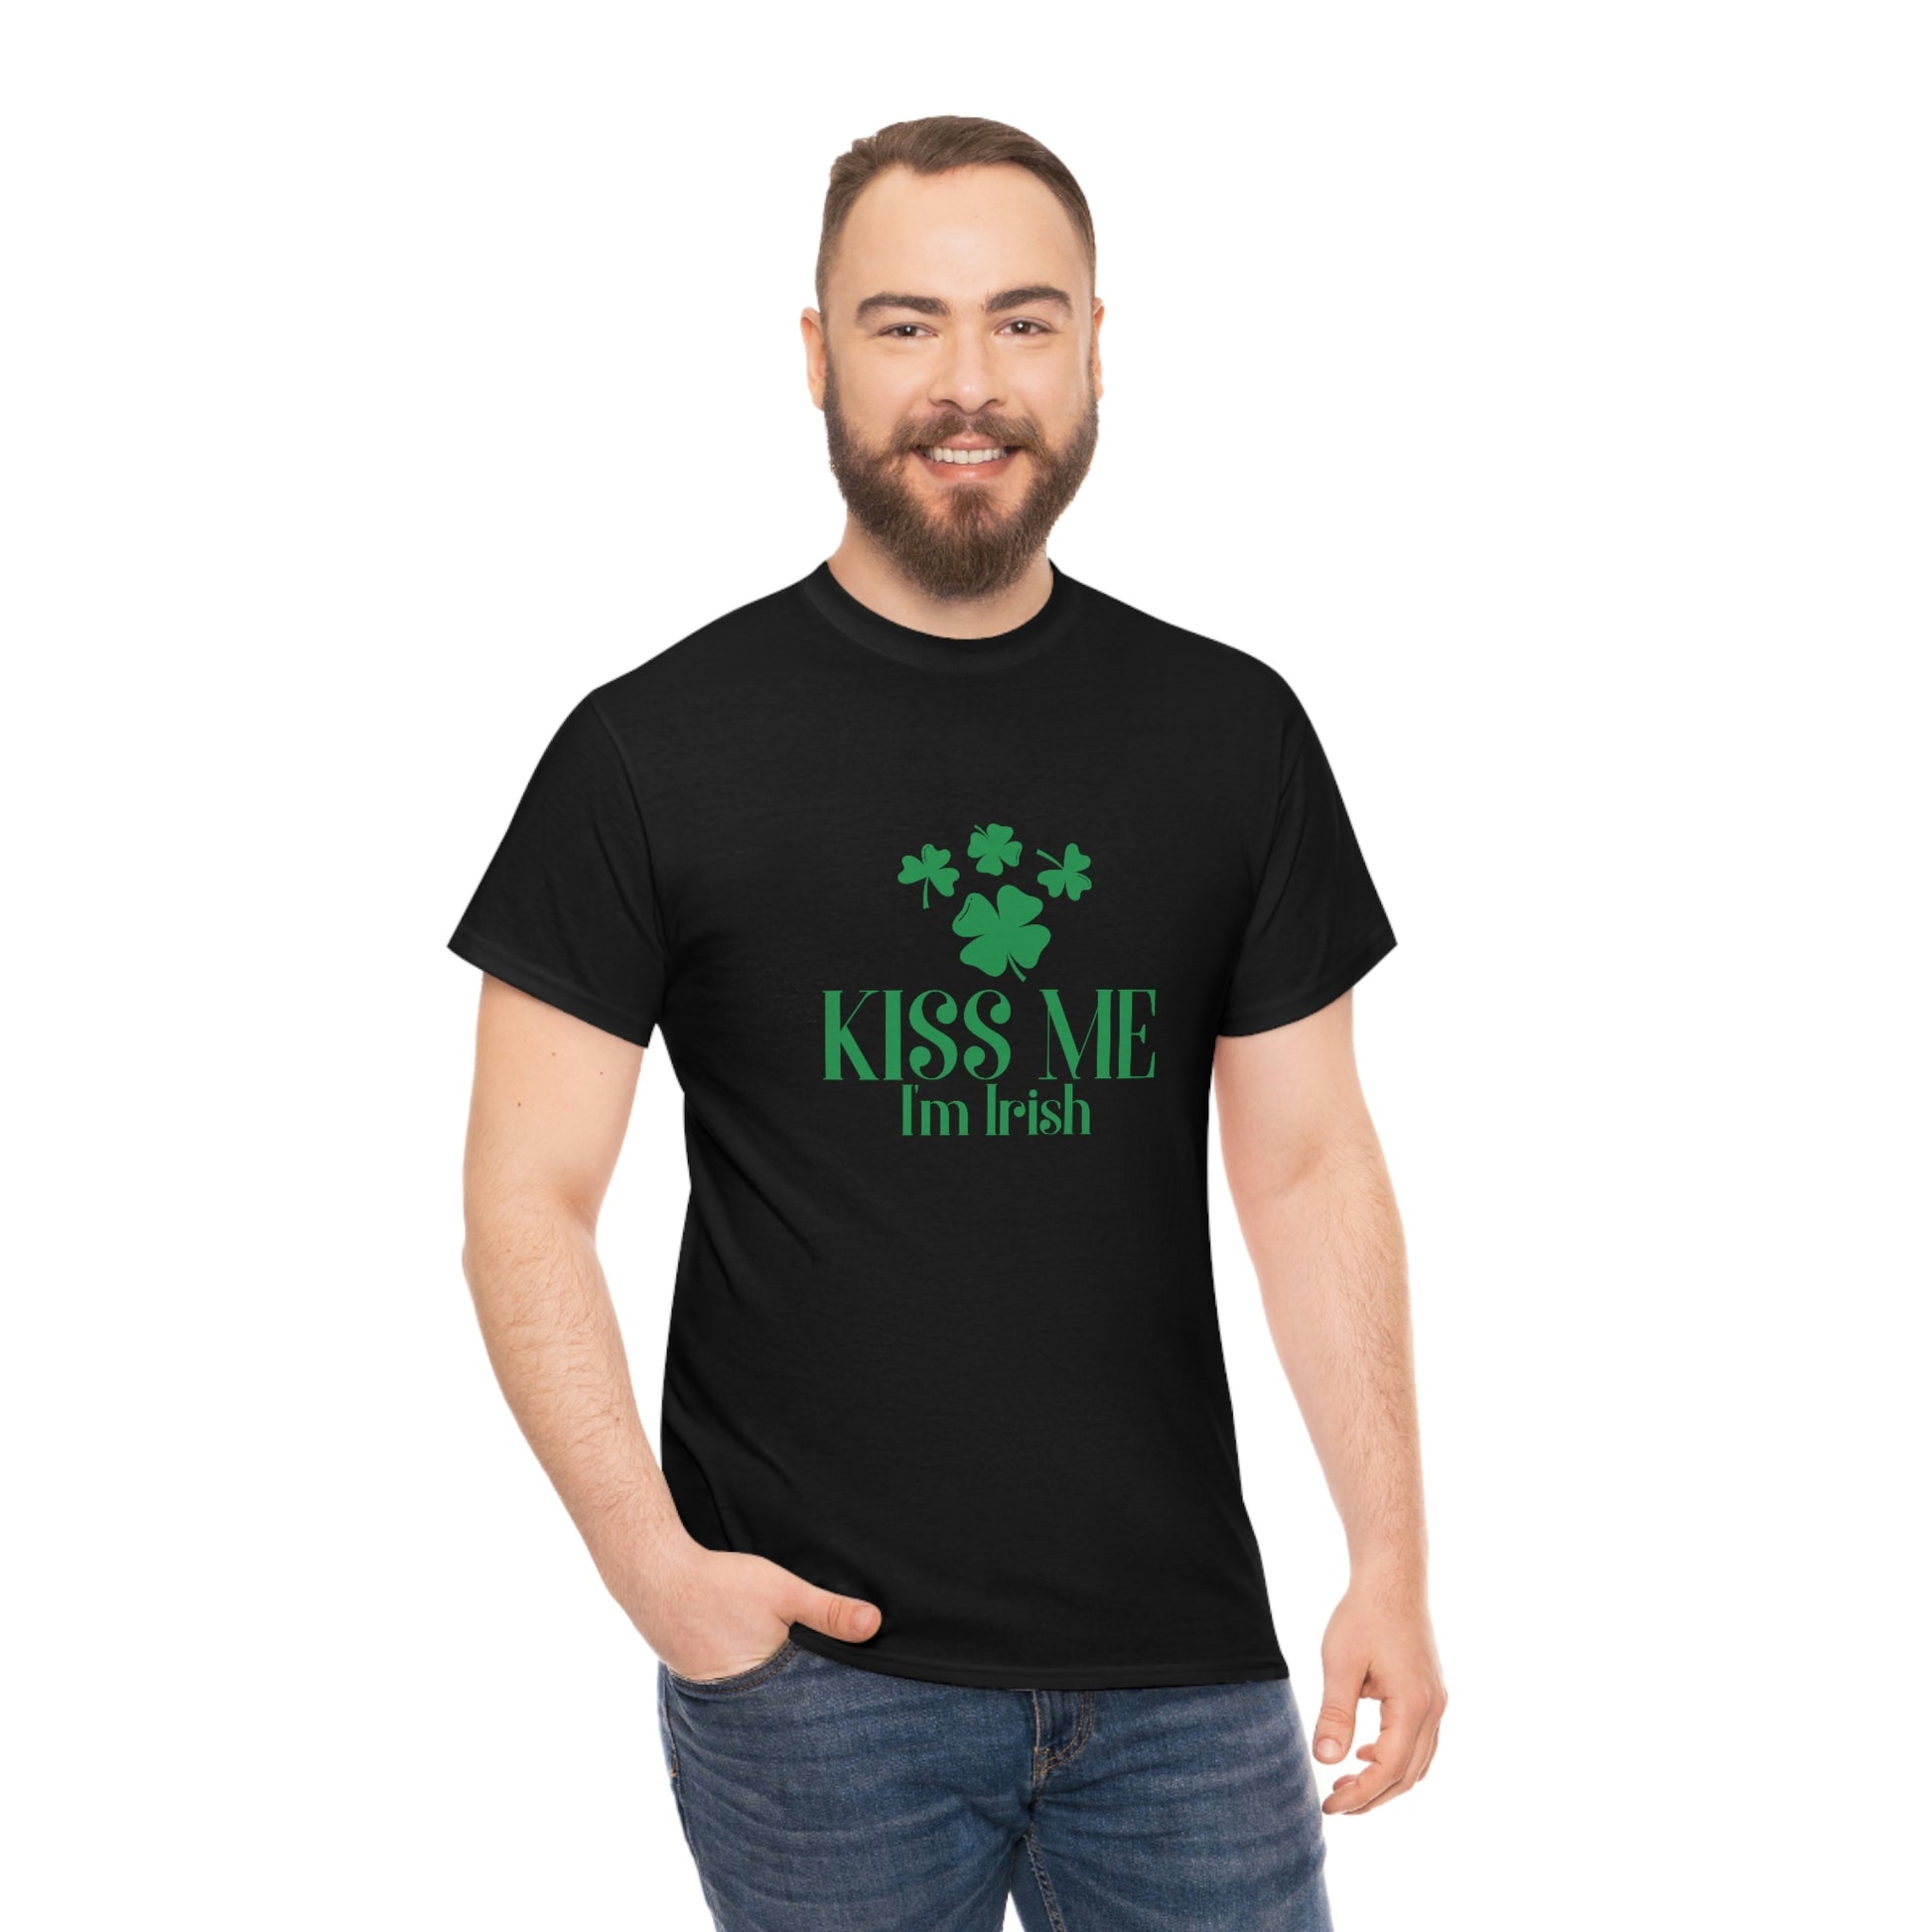 Mock up of a bearded man wearing our Black t-shirt